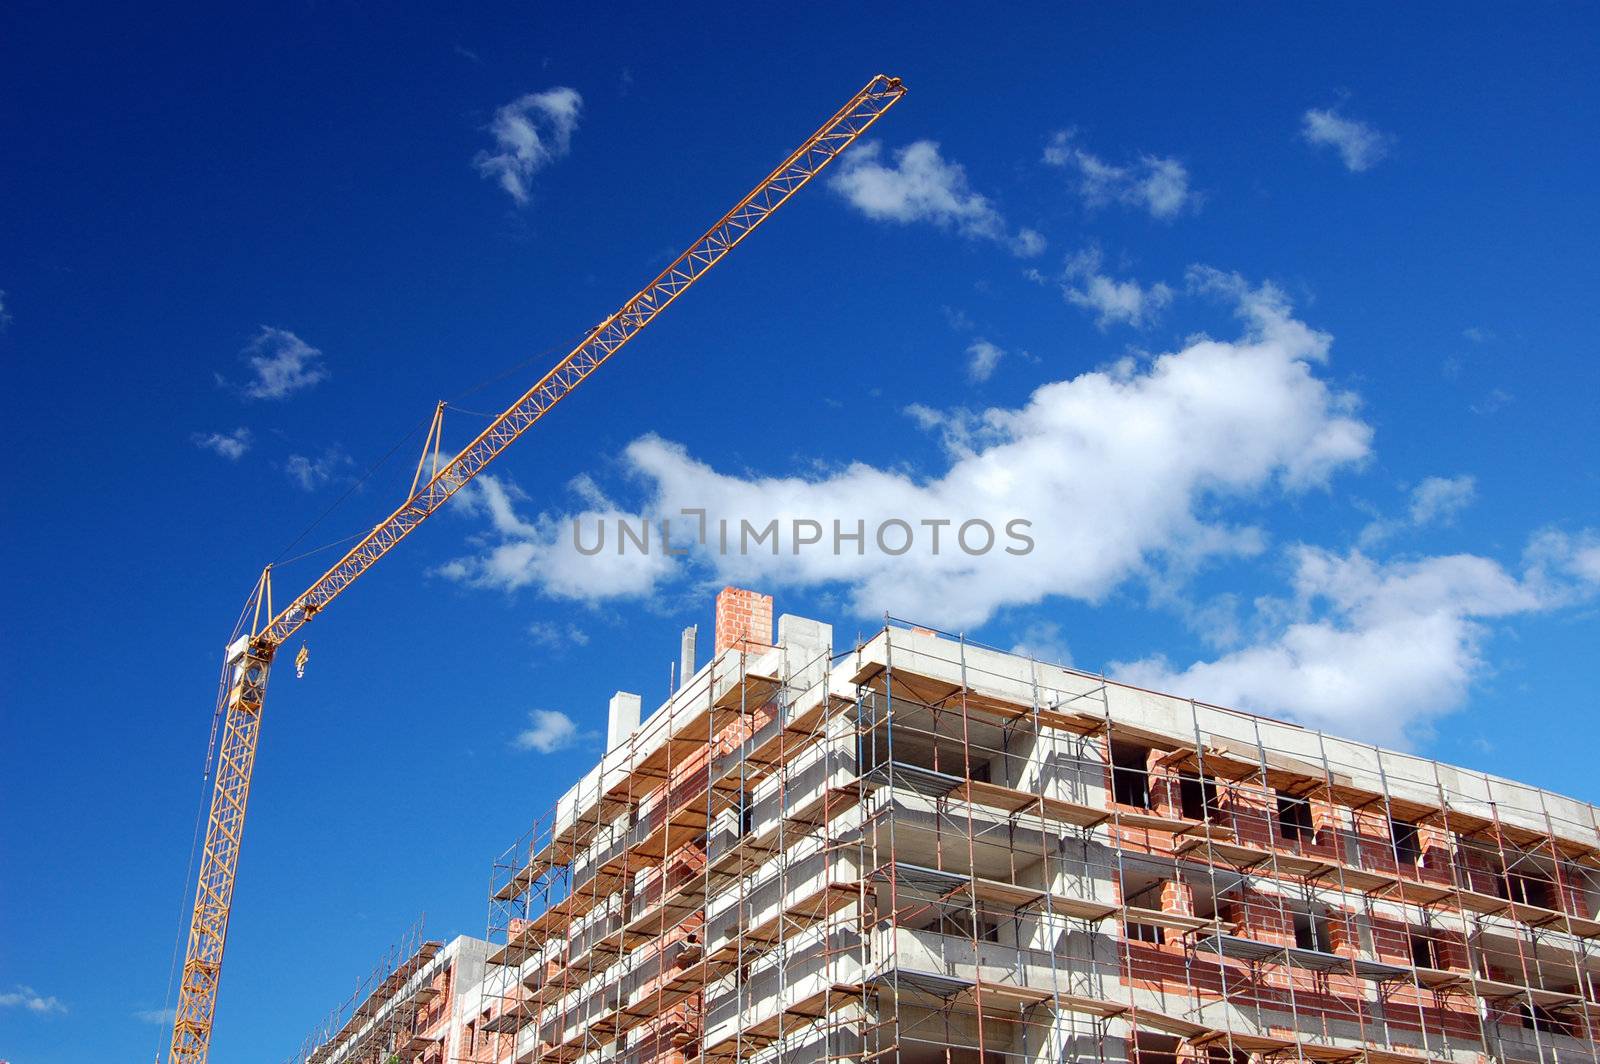 Building under construction by lebanmax